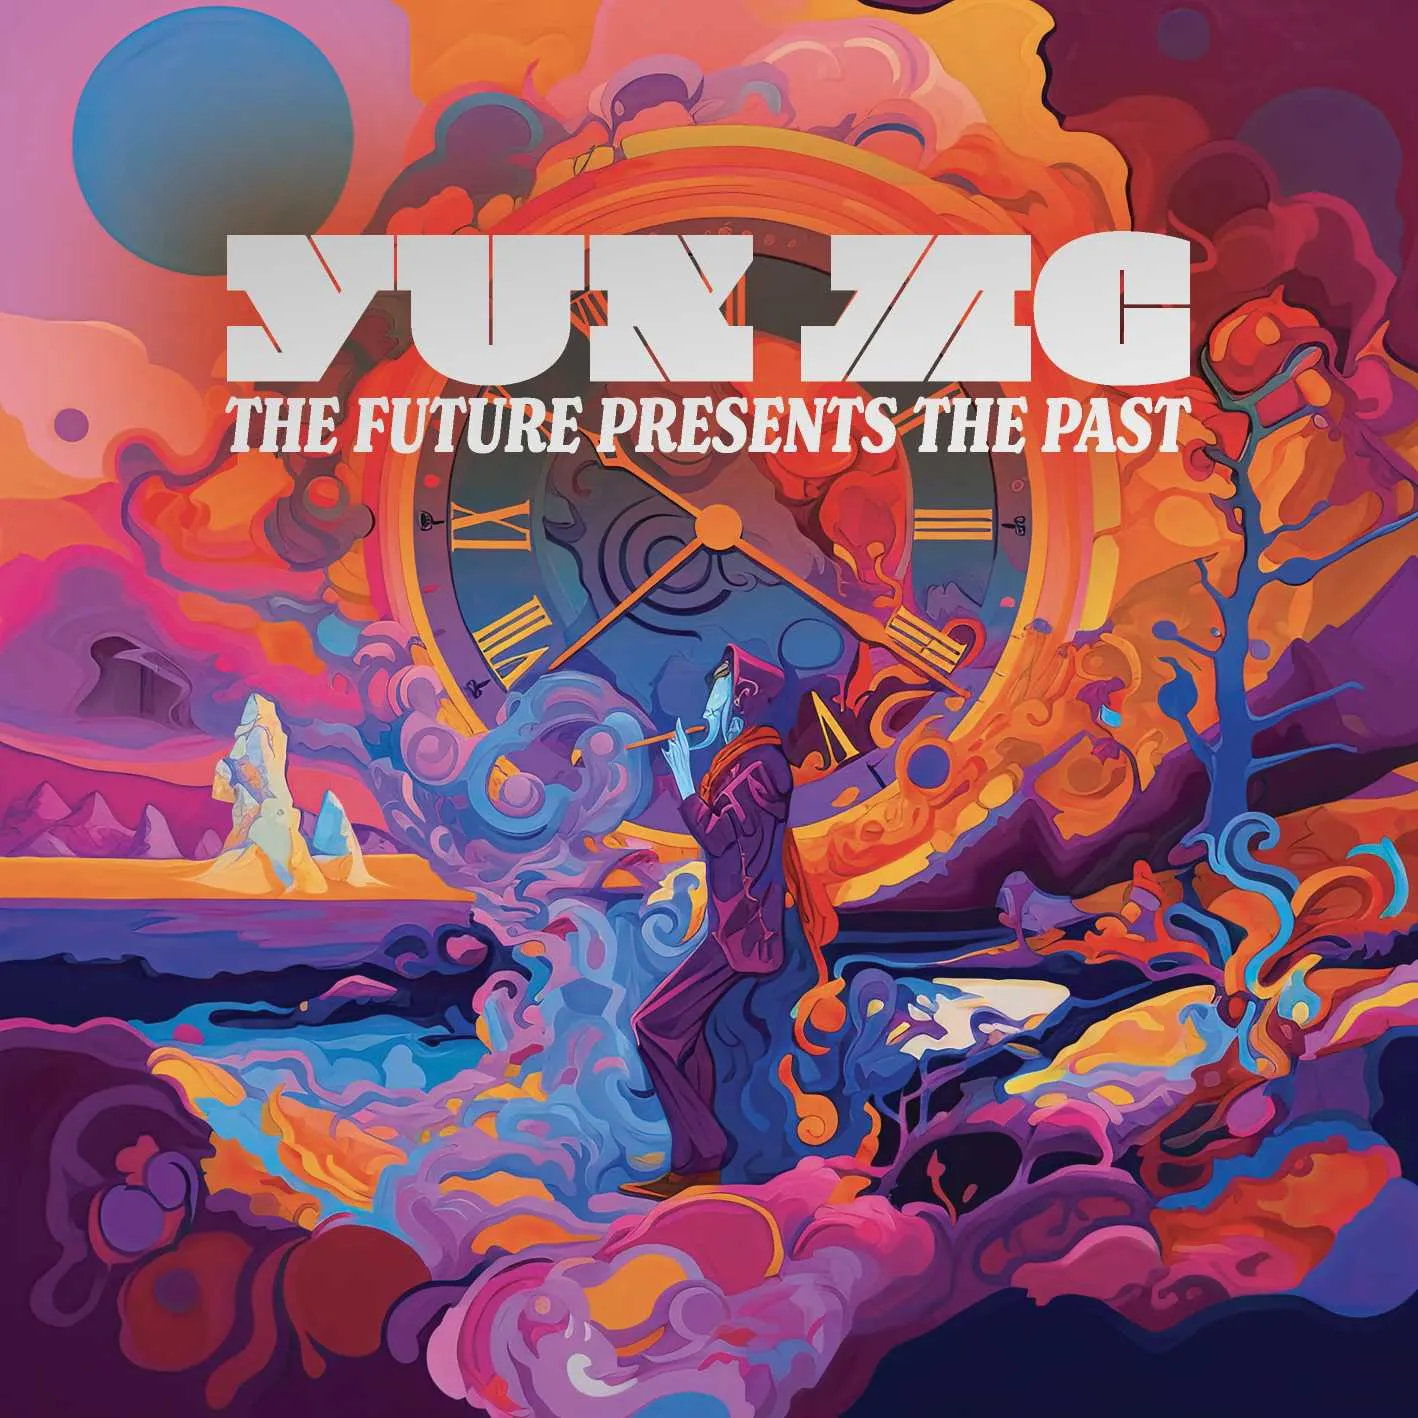 Album cover for “The Future Presents The Past” by Yuk MC